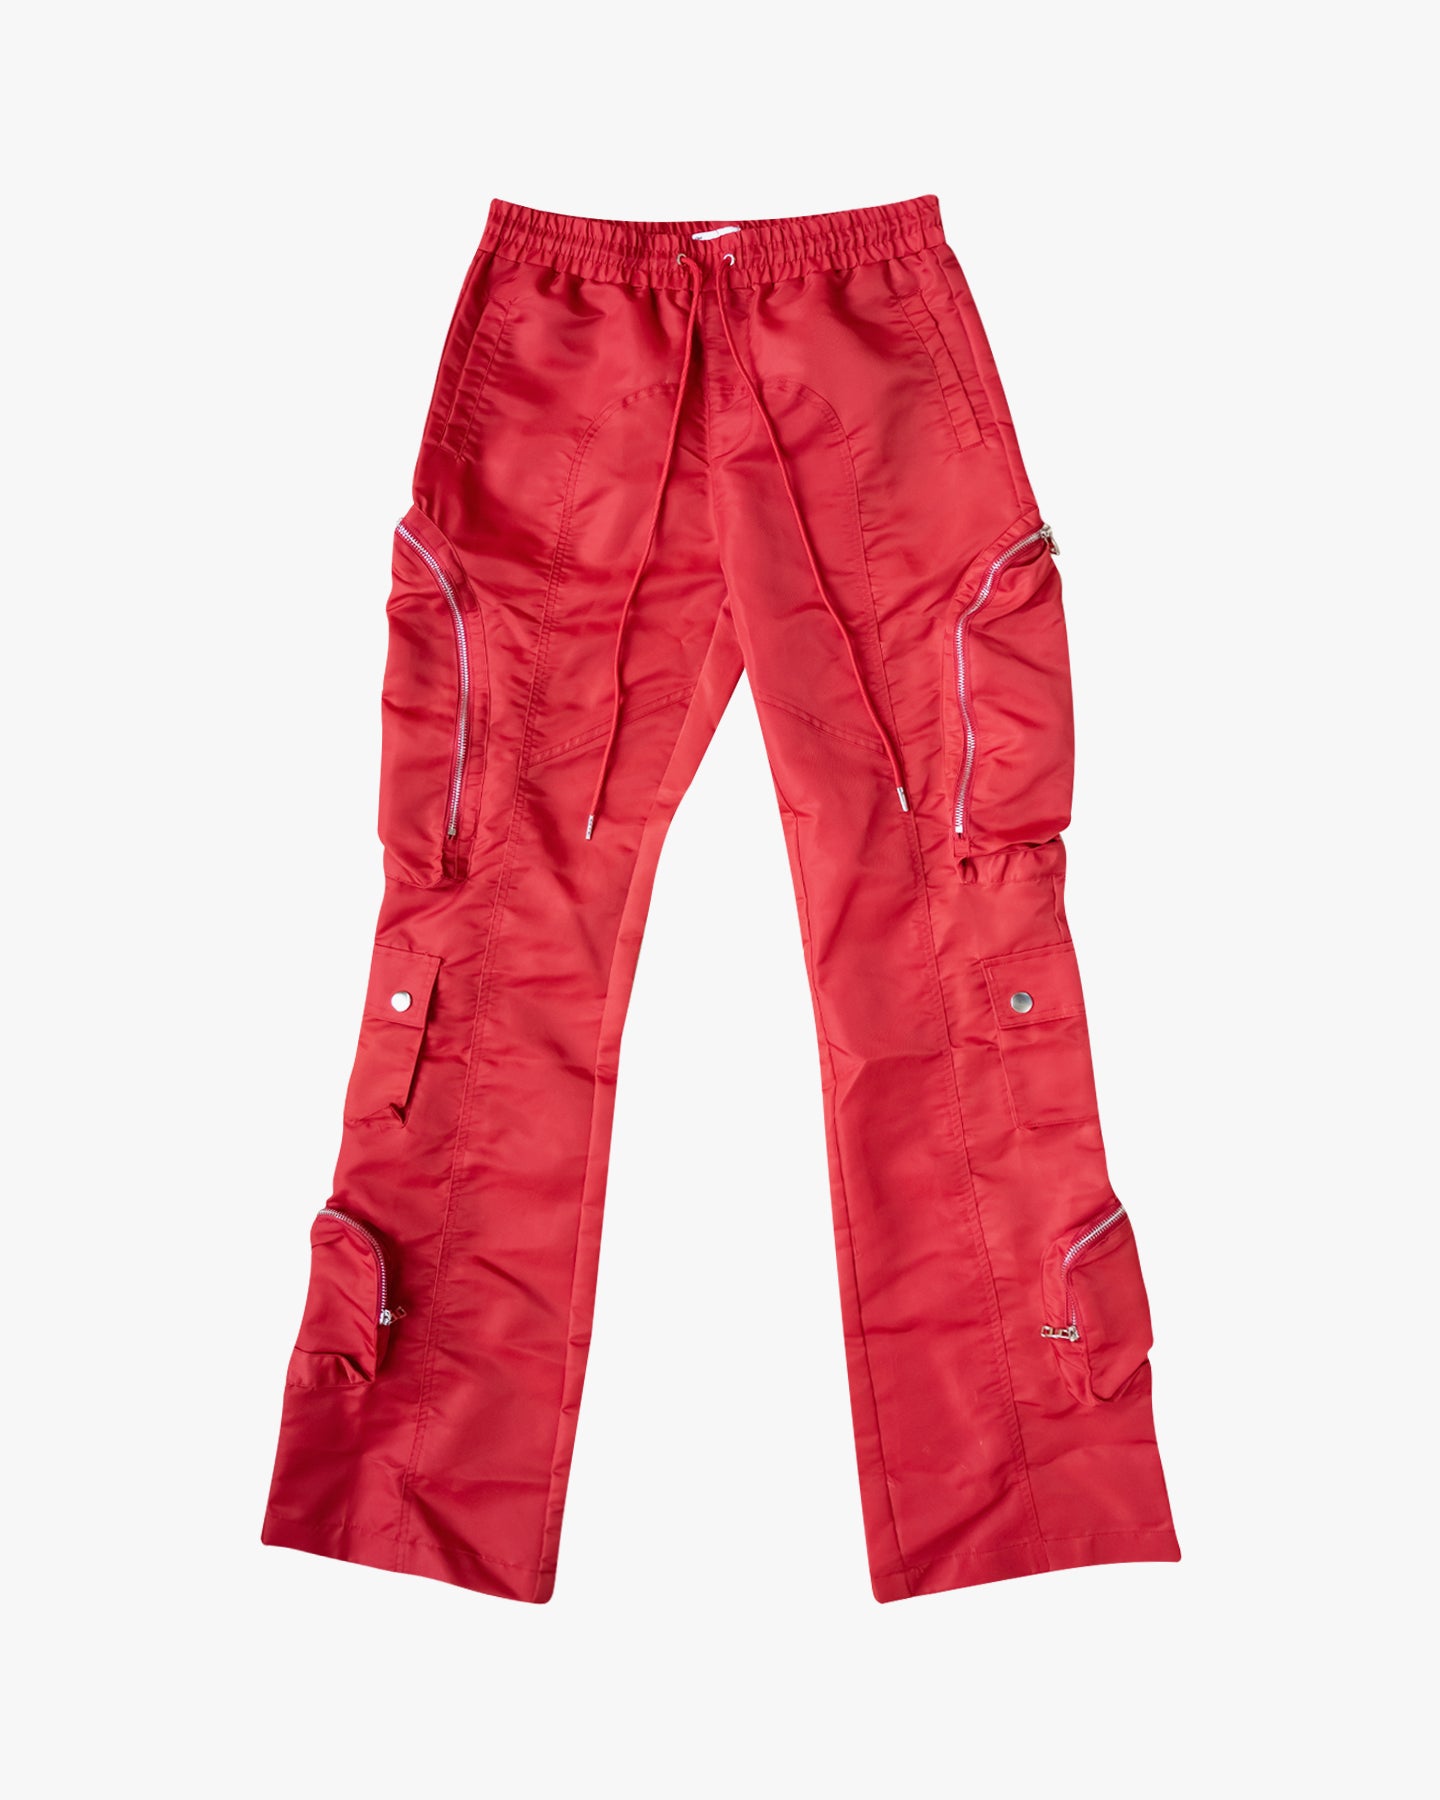 EPTM MOON CARGO-RED